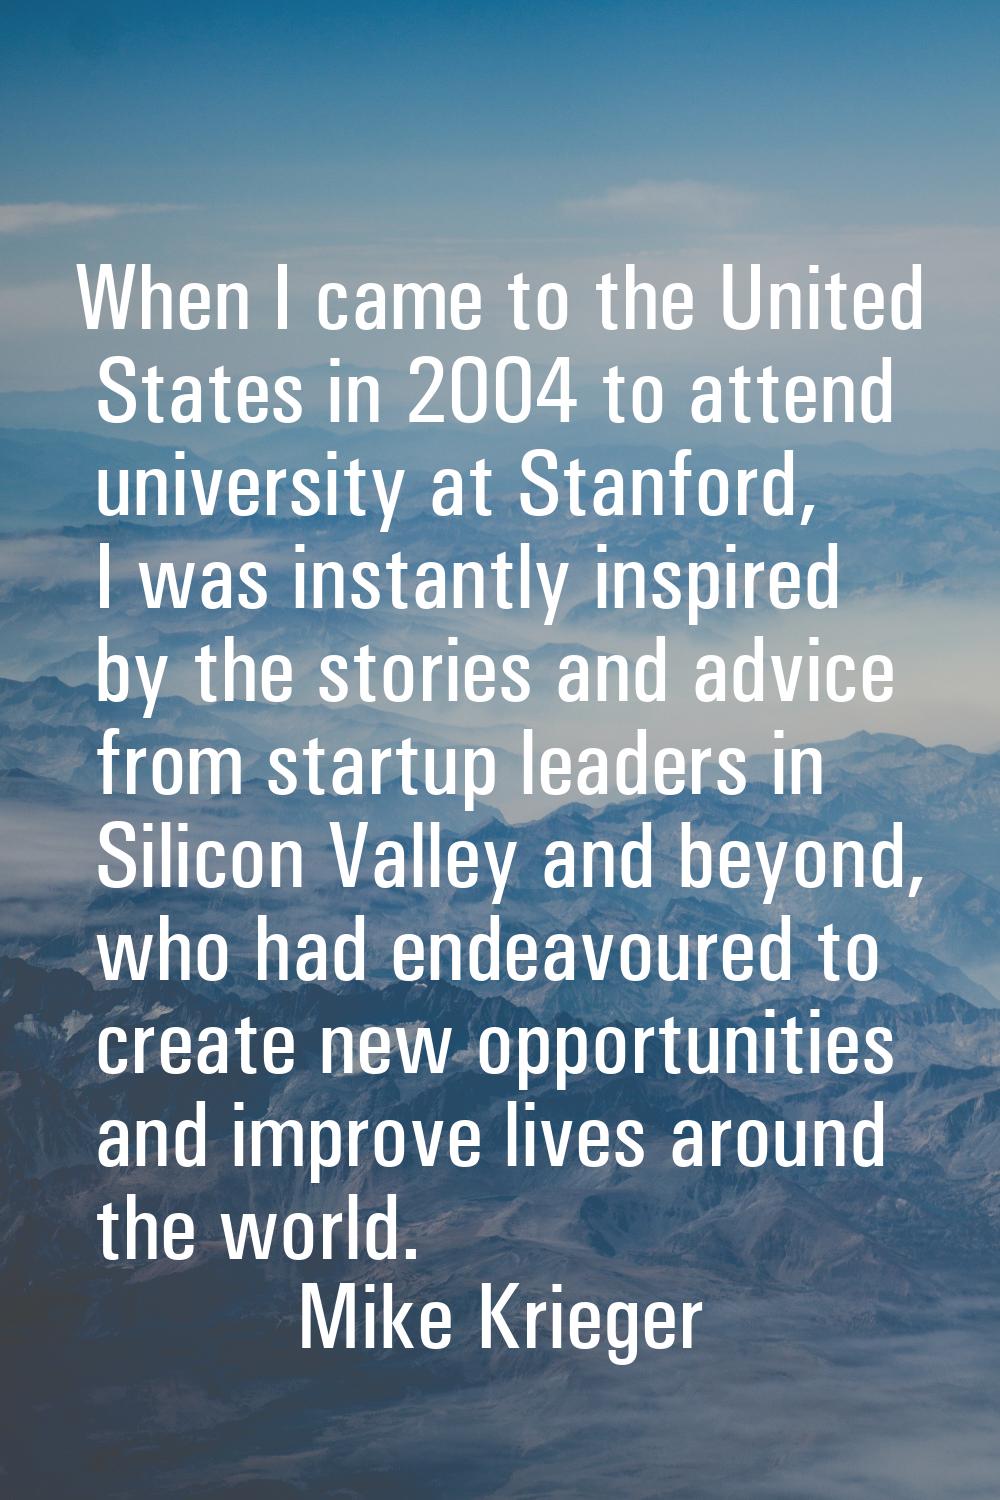 When I came to the United States in 2004 to attend university at Stanford, I was instantly inspired